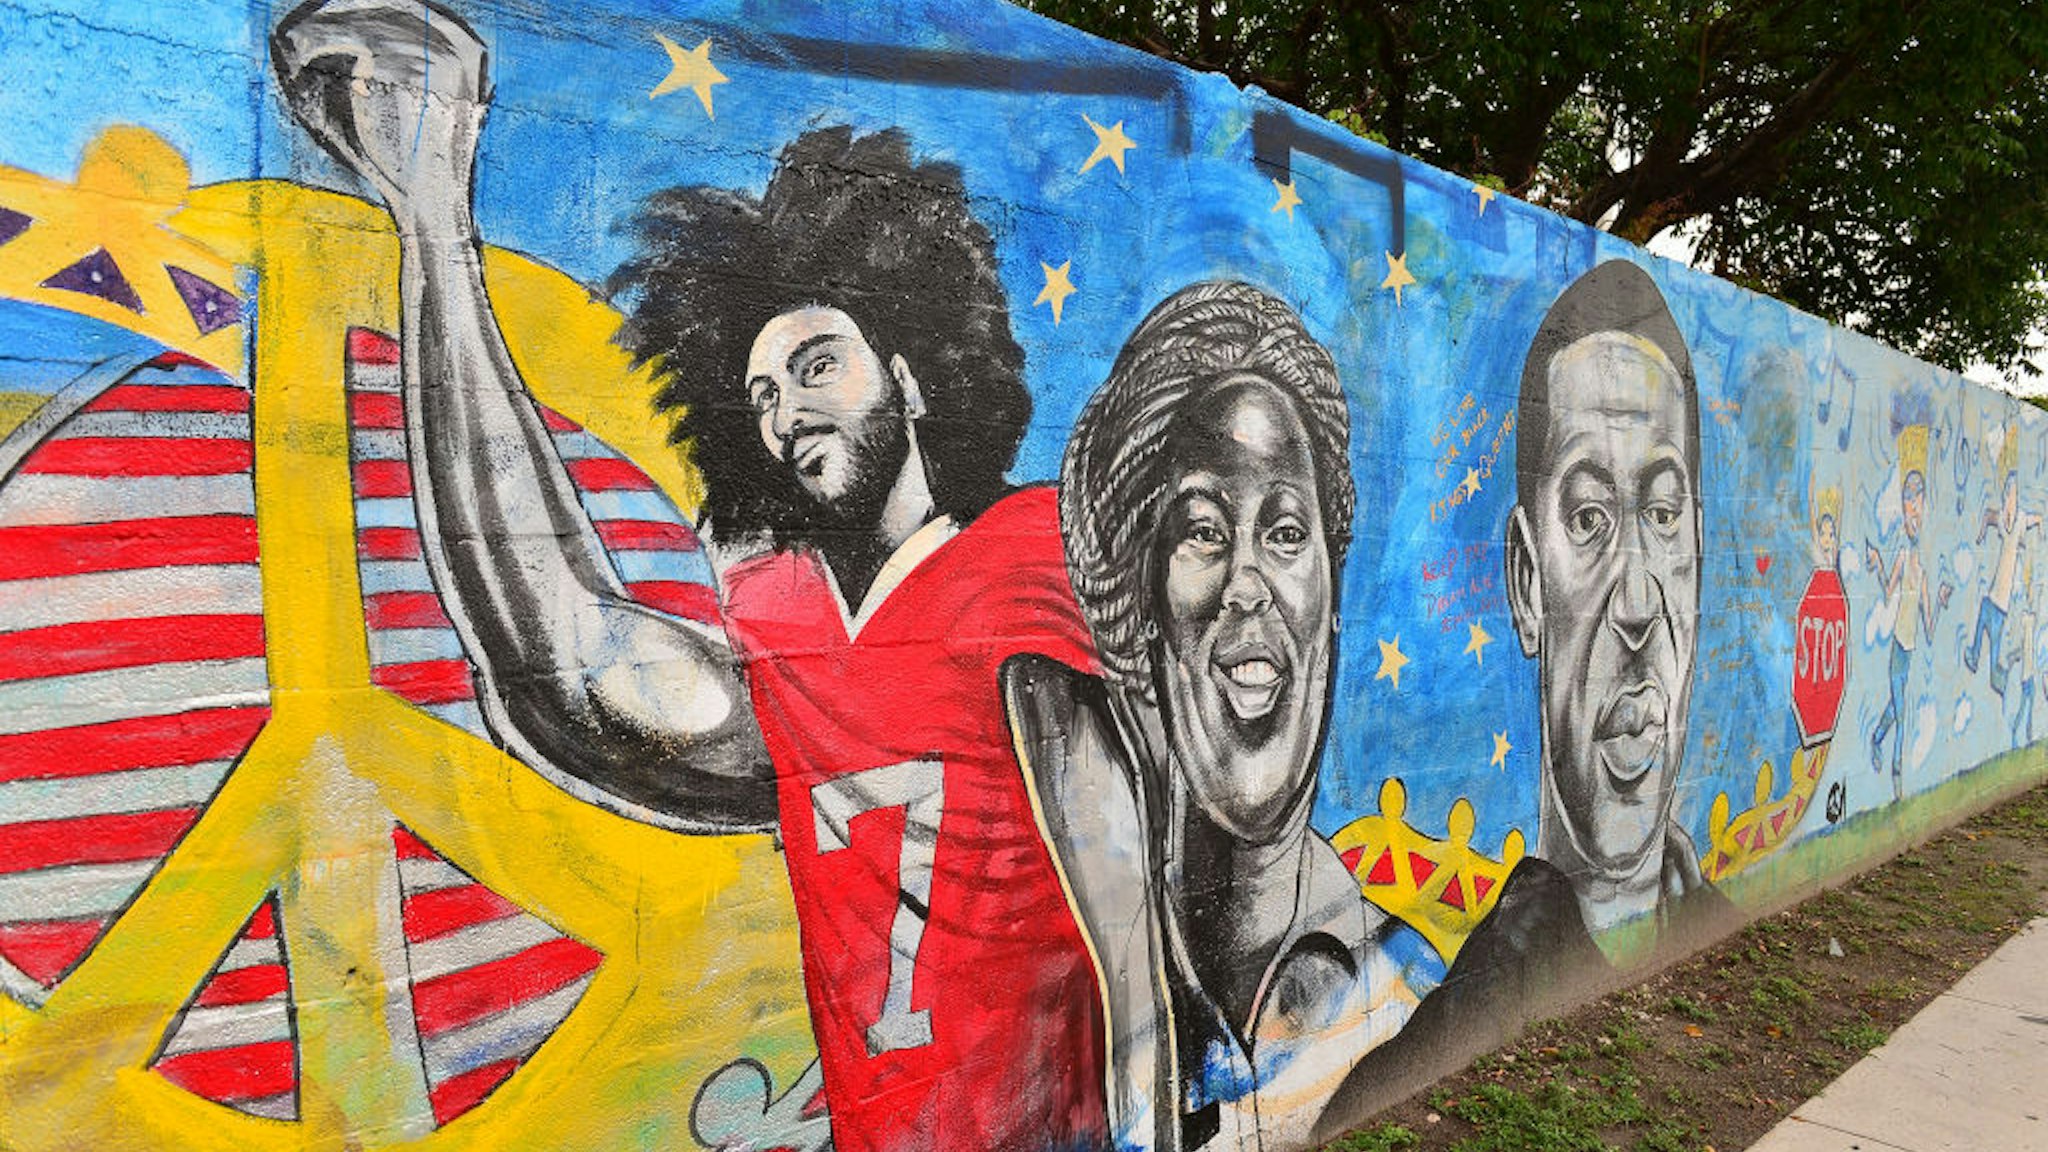 A mural of Colin Kaepernick and George Floyd is seen as protesters demonstrate against police brutality on June 5, 2020 in Miami, Florida. Protesters continue to demand changes on how Police interact with African American after George Floyd died while in police custody in Minneapolis, Minnesota on May 25th. (Photo by Johnny Louis/Getty Images)